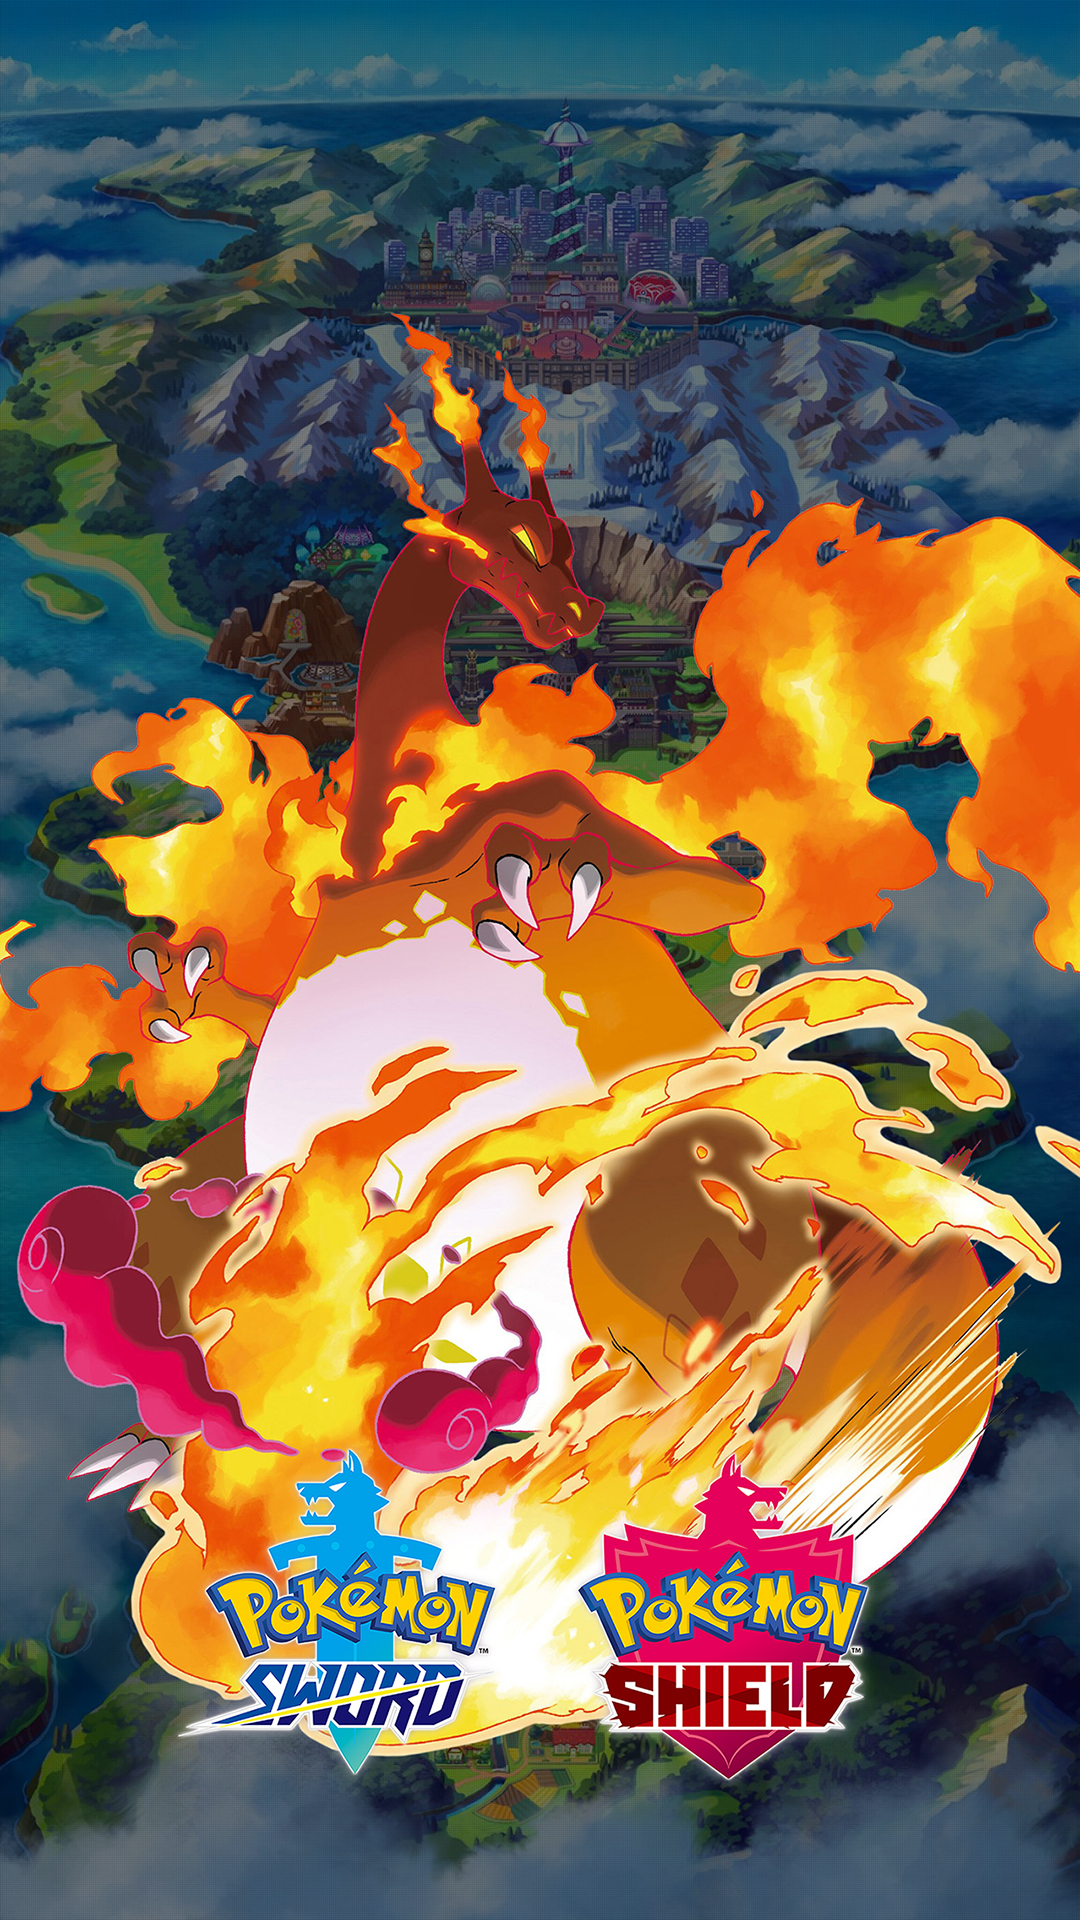 Pokemon Sword and Shield Gigantamax Charizard Wallpapers - Cat with Monocle